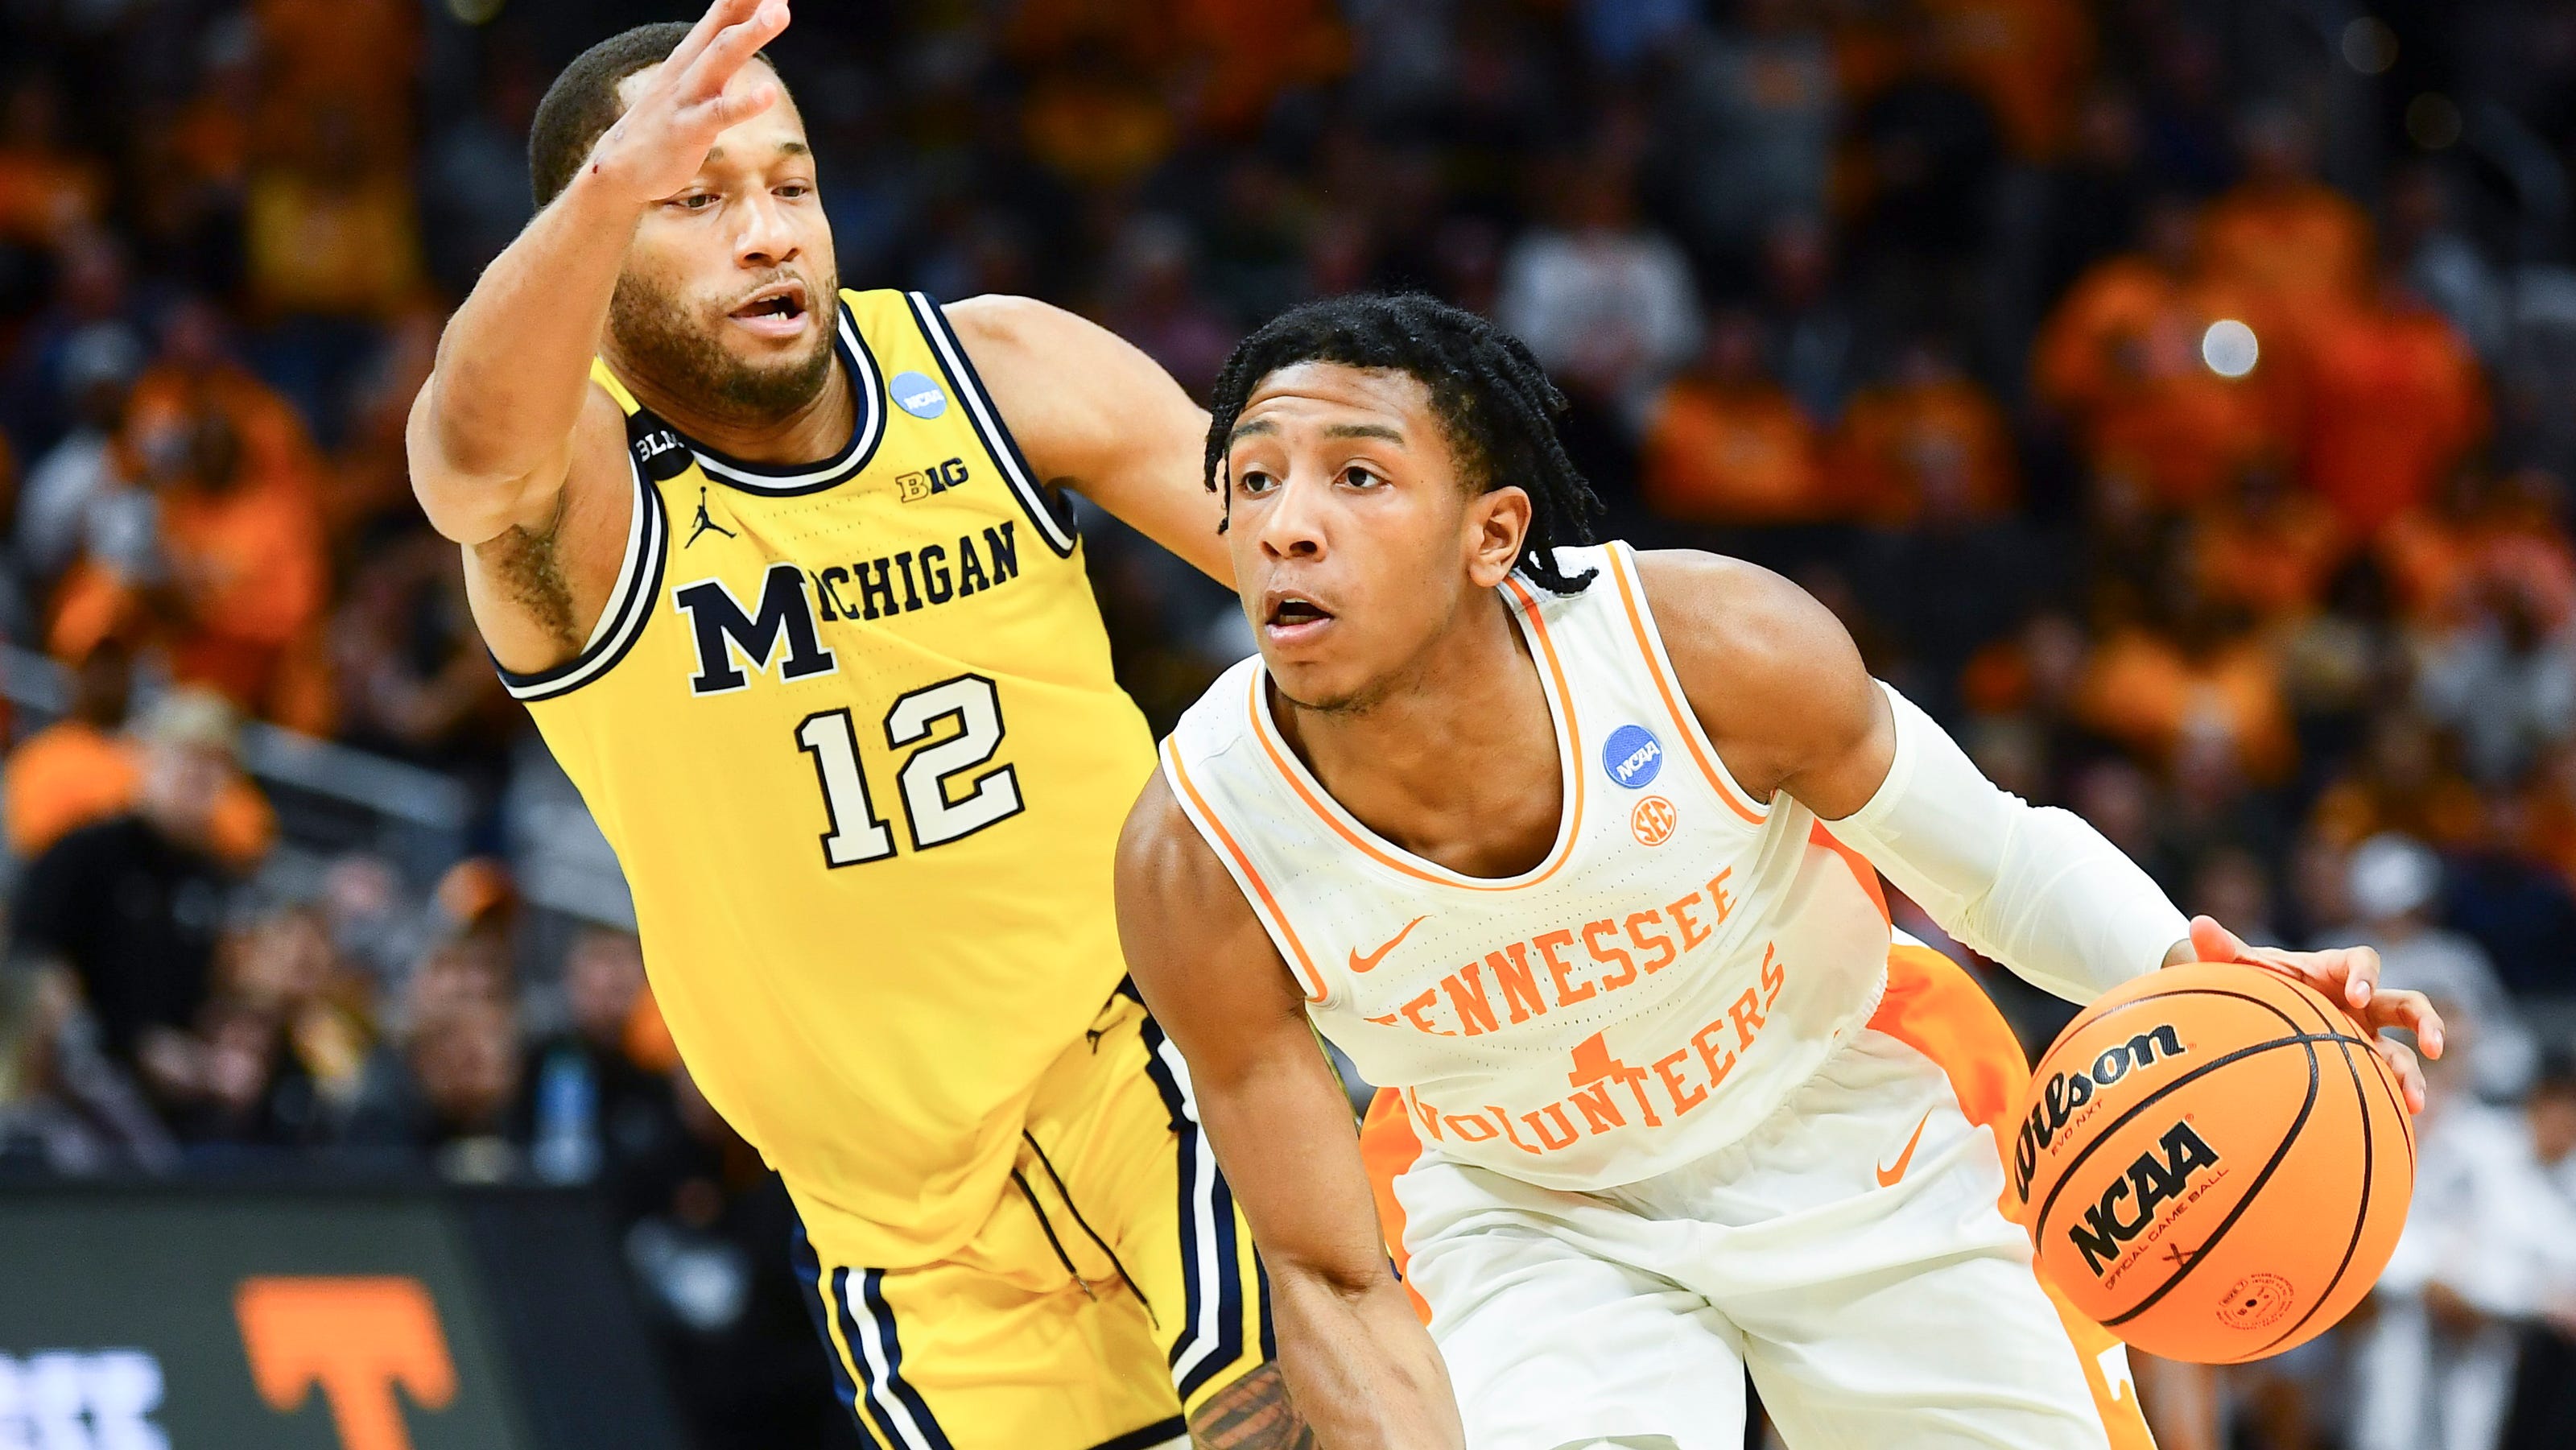 Tennessee basketball stunned by Michigan in NCAA Tournament 2022